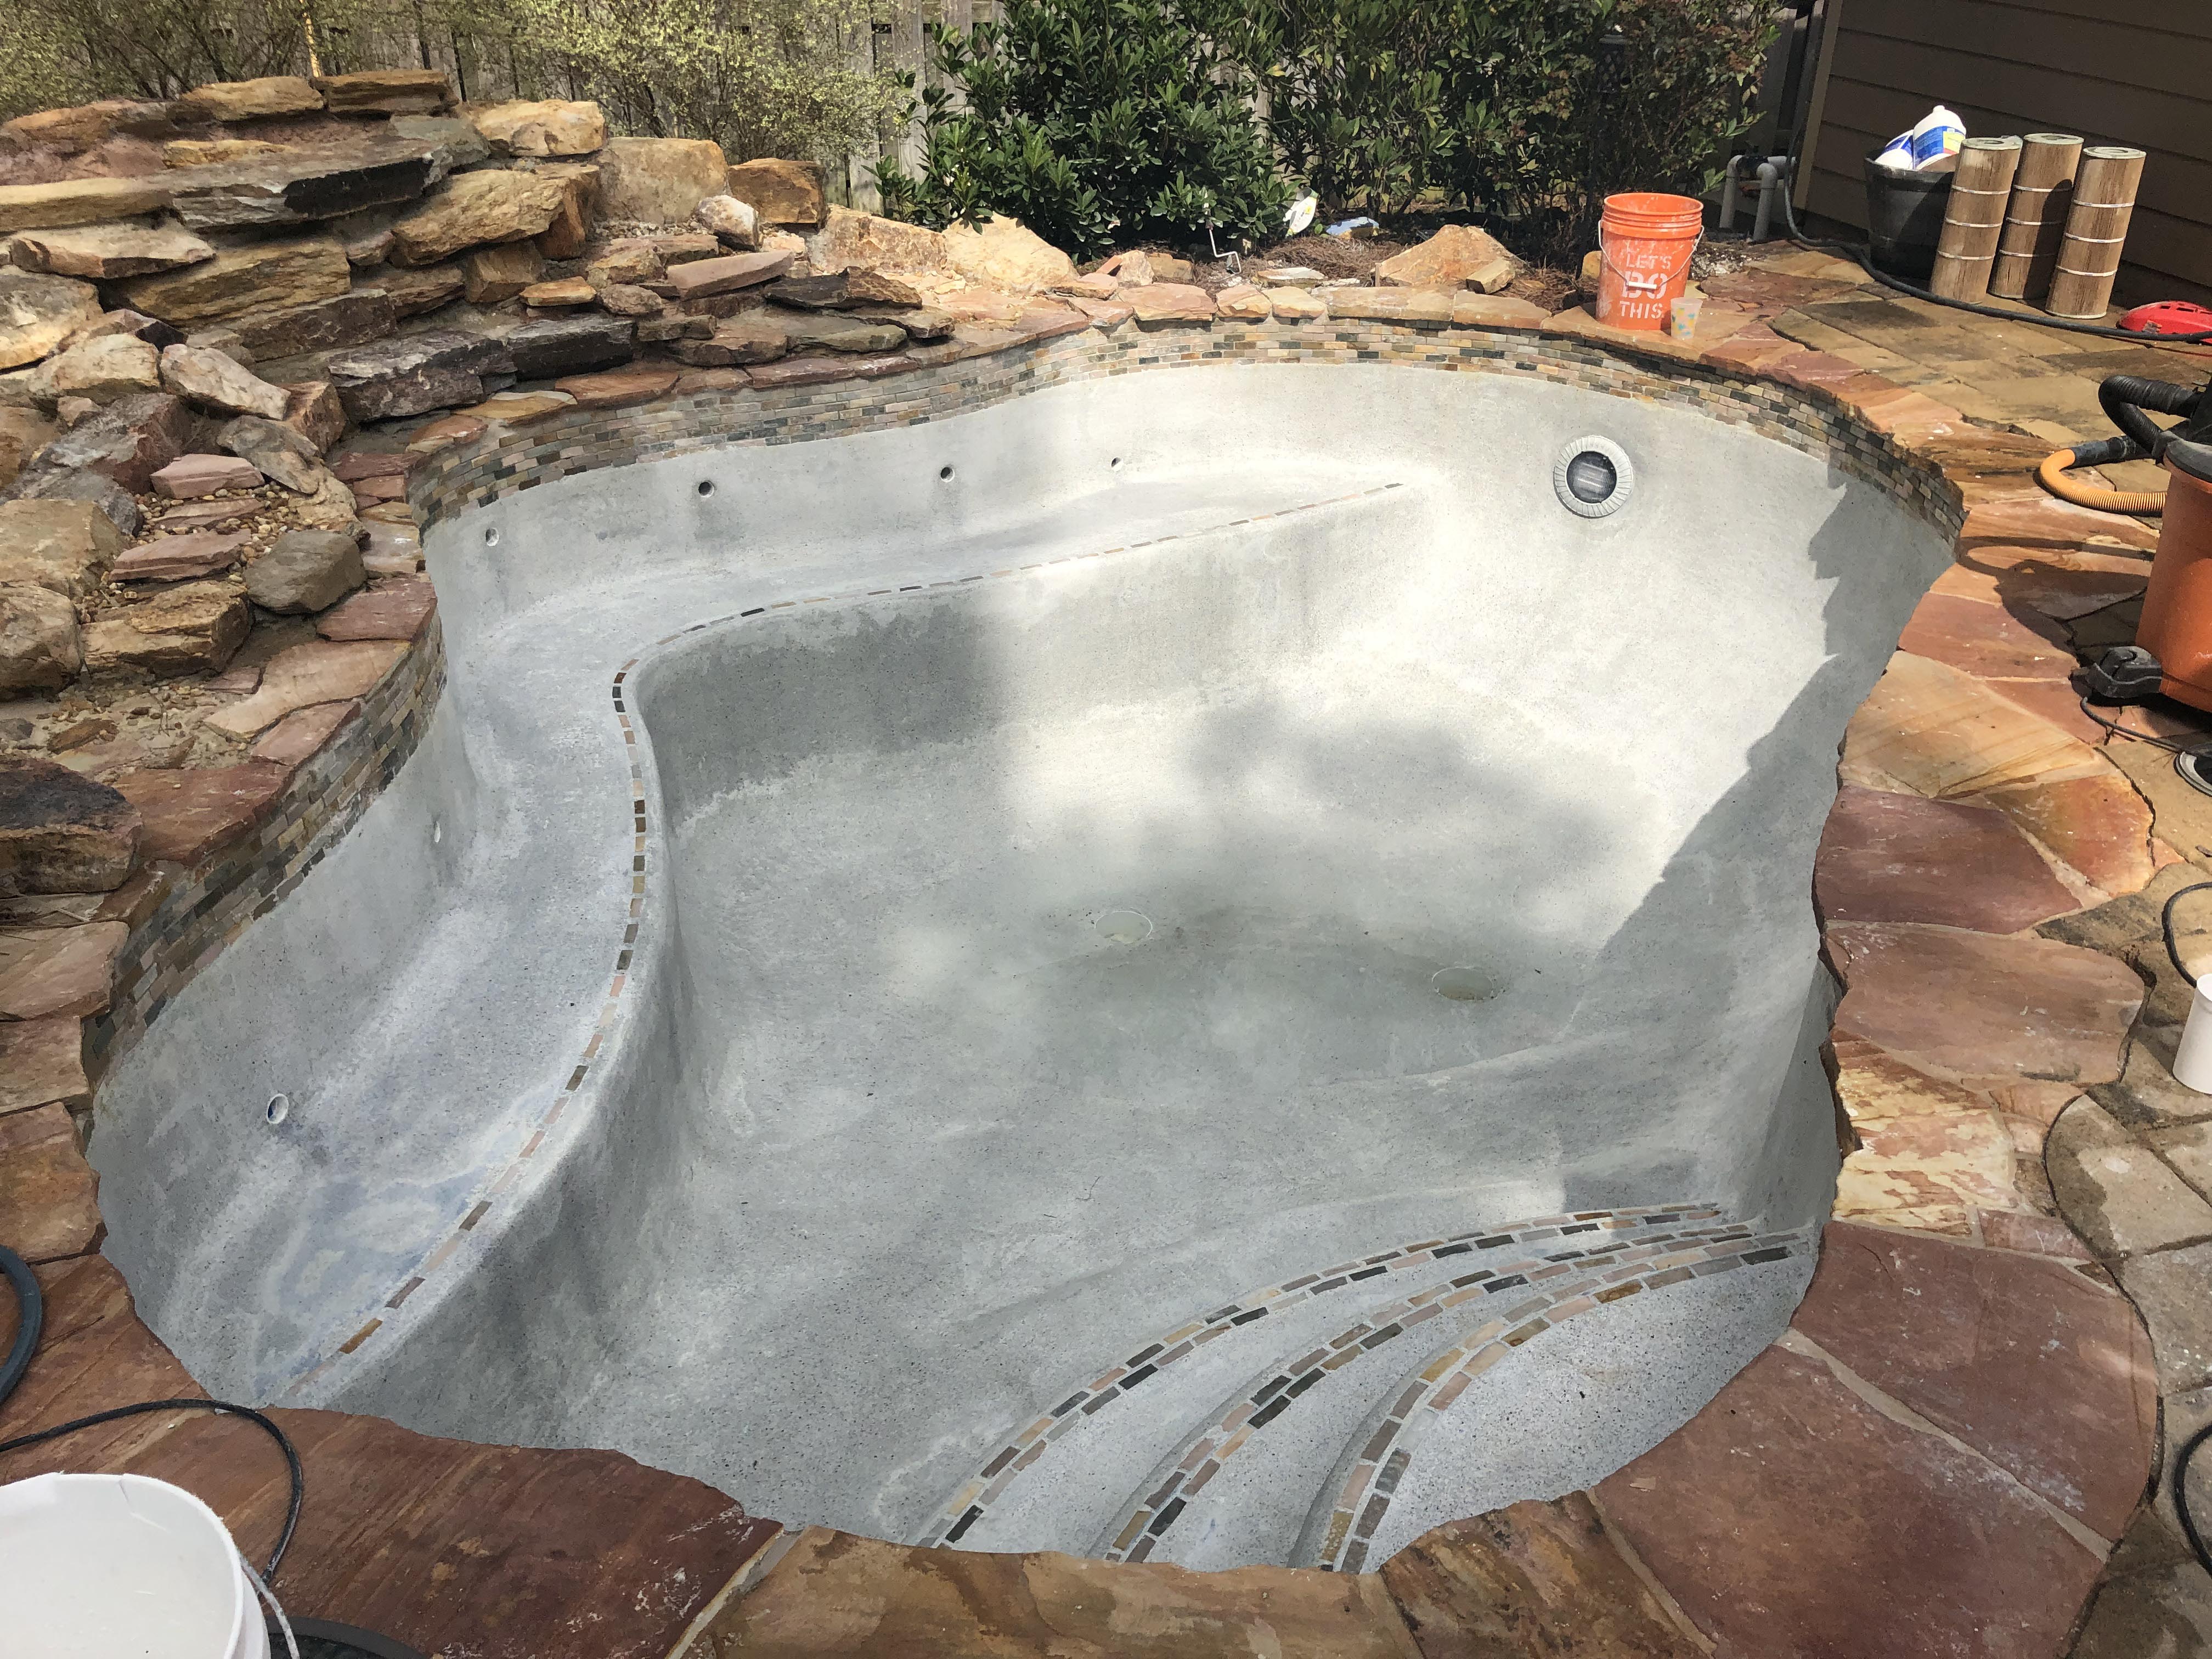 Drained pool to better show inlets